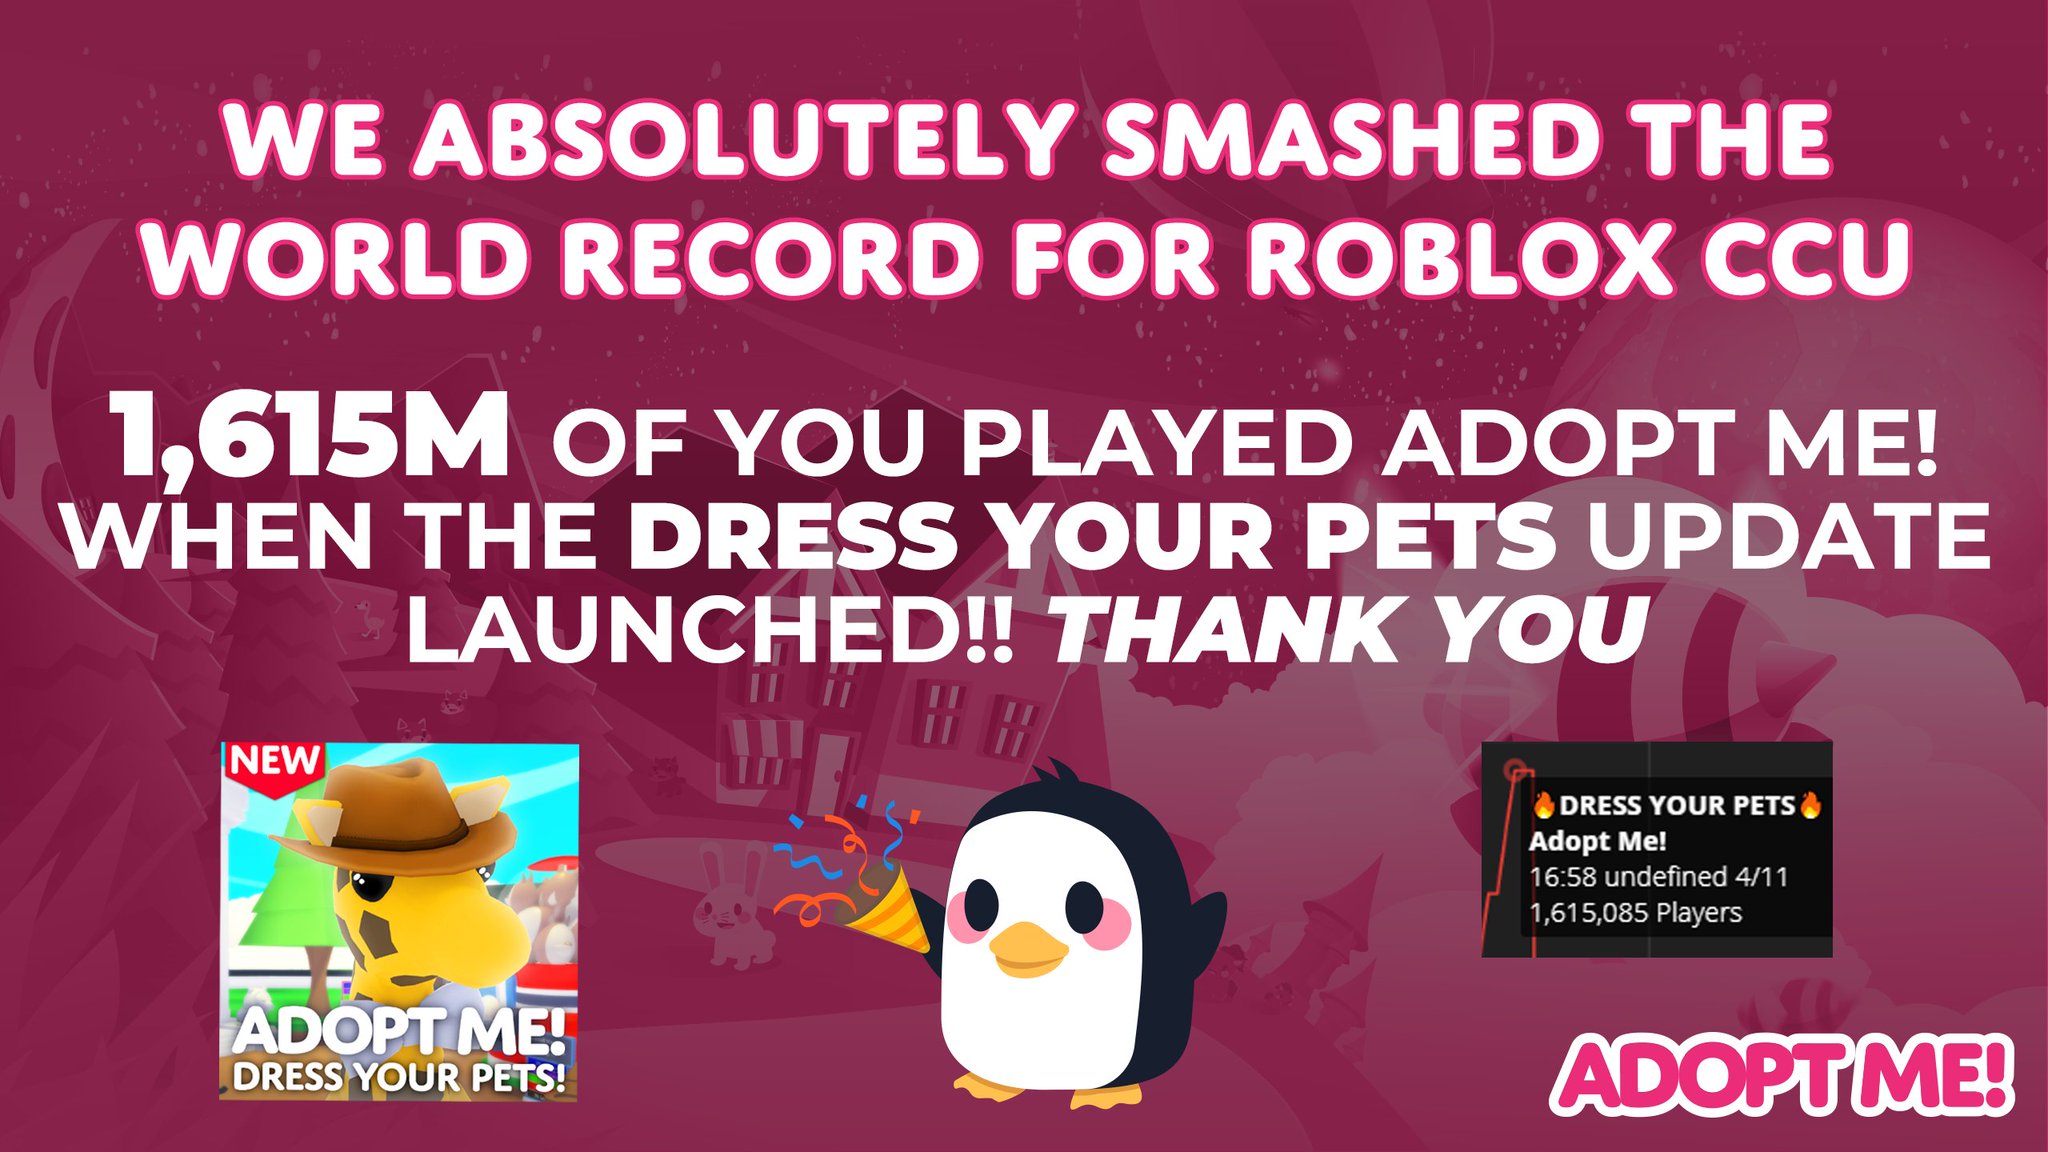 Adopt Me On Twitter The New World Record For Roblox Ccu Players Active Is 1 615 Million Players Thank You So Much For Tuning In To See The Live Event And Apologies - roblox adopt me roblox